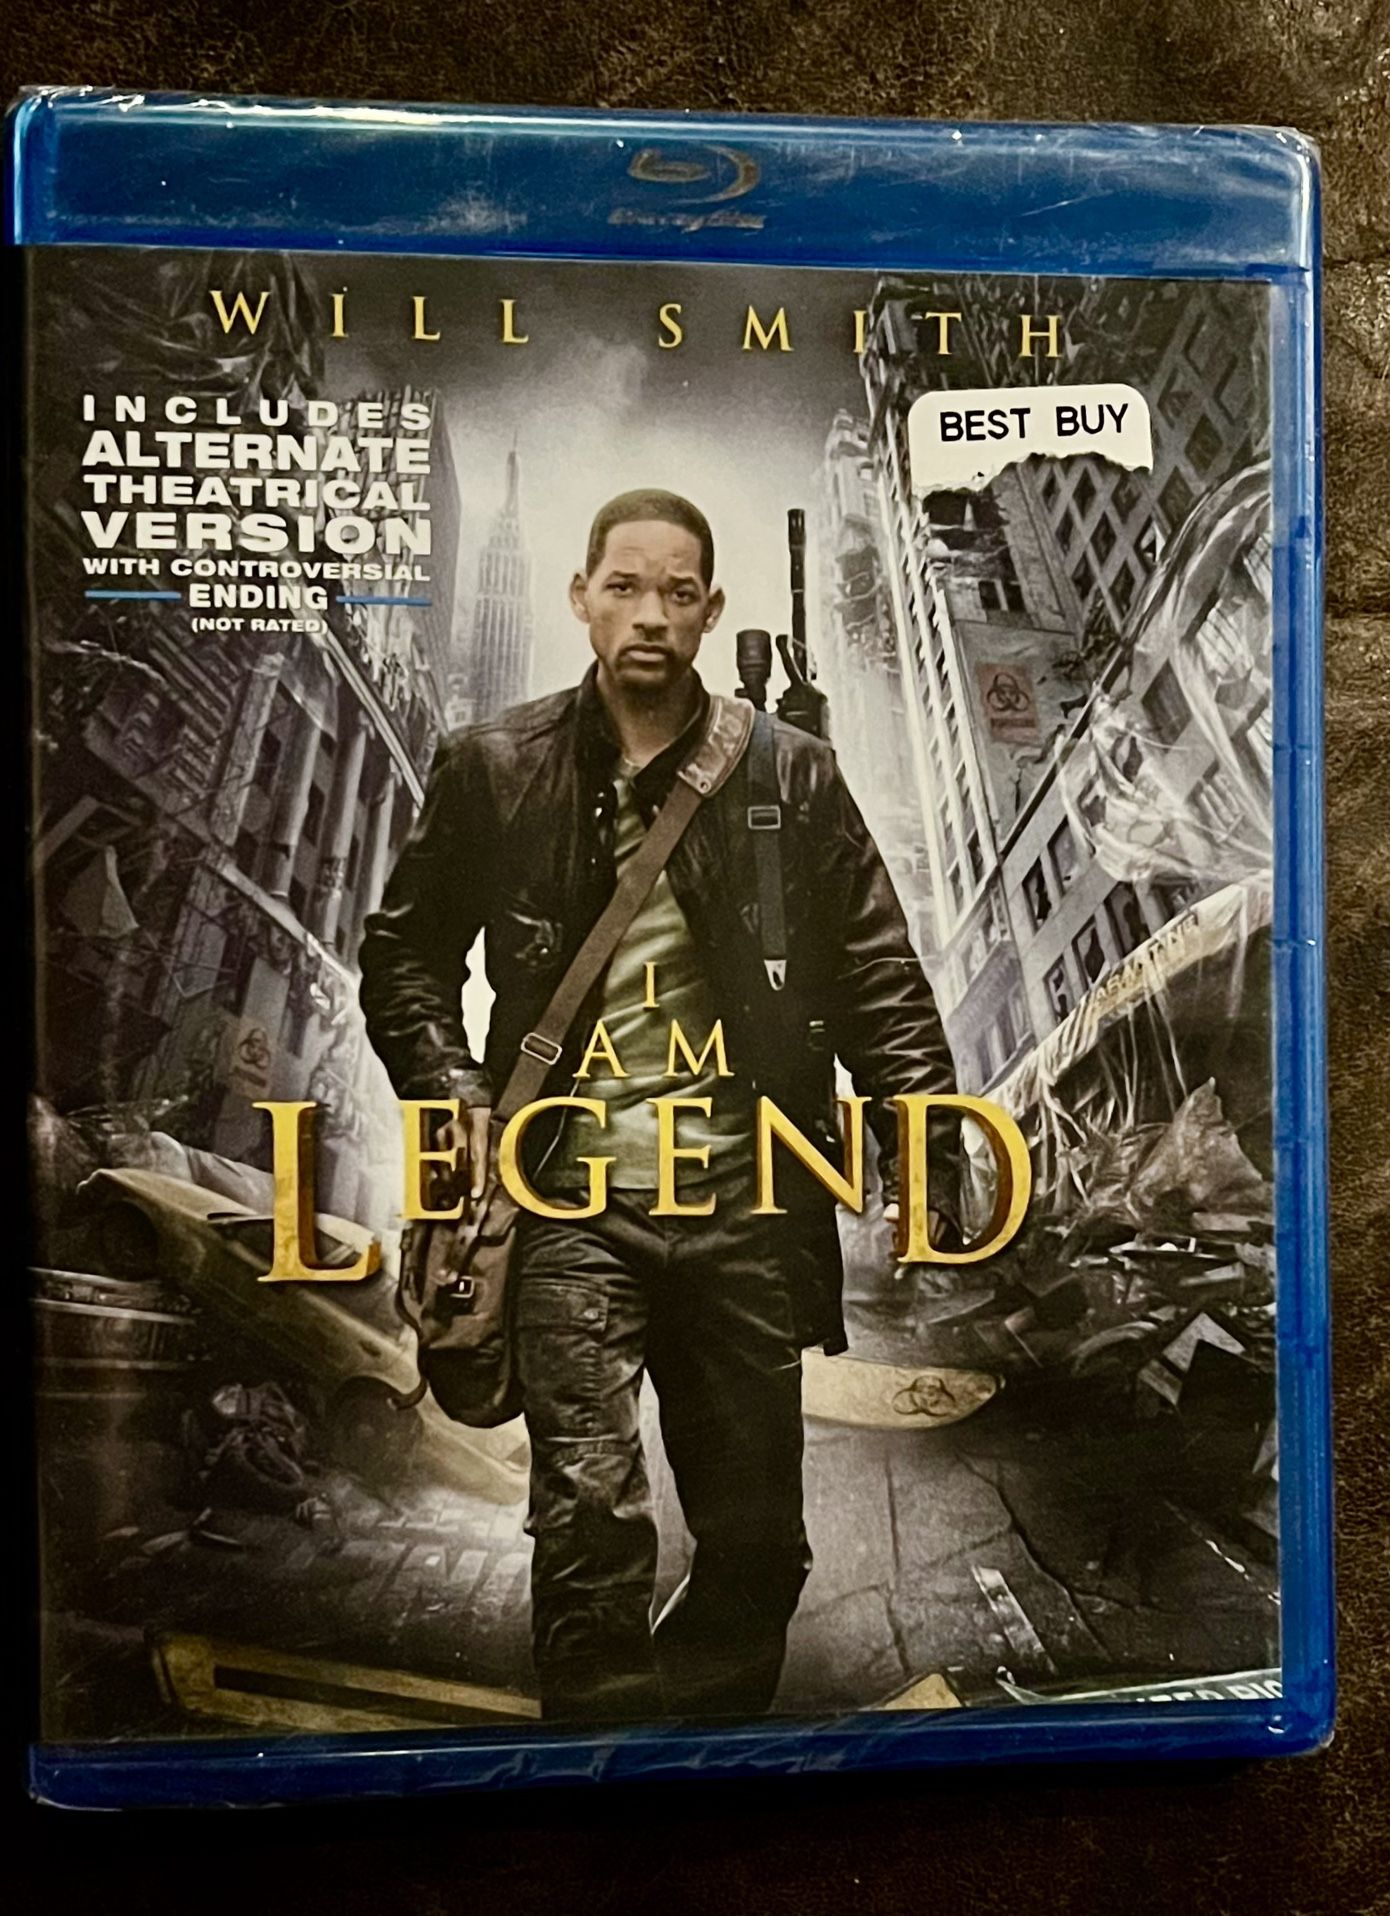 Sealed DVD “I AM LEGEND”, Will Smith. LAST MAN ON EARTH…PG13.